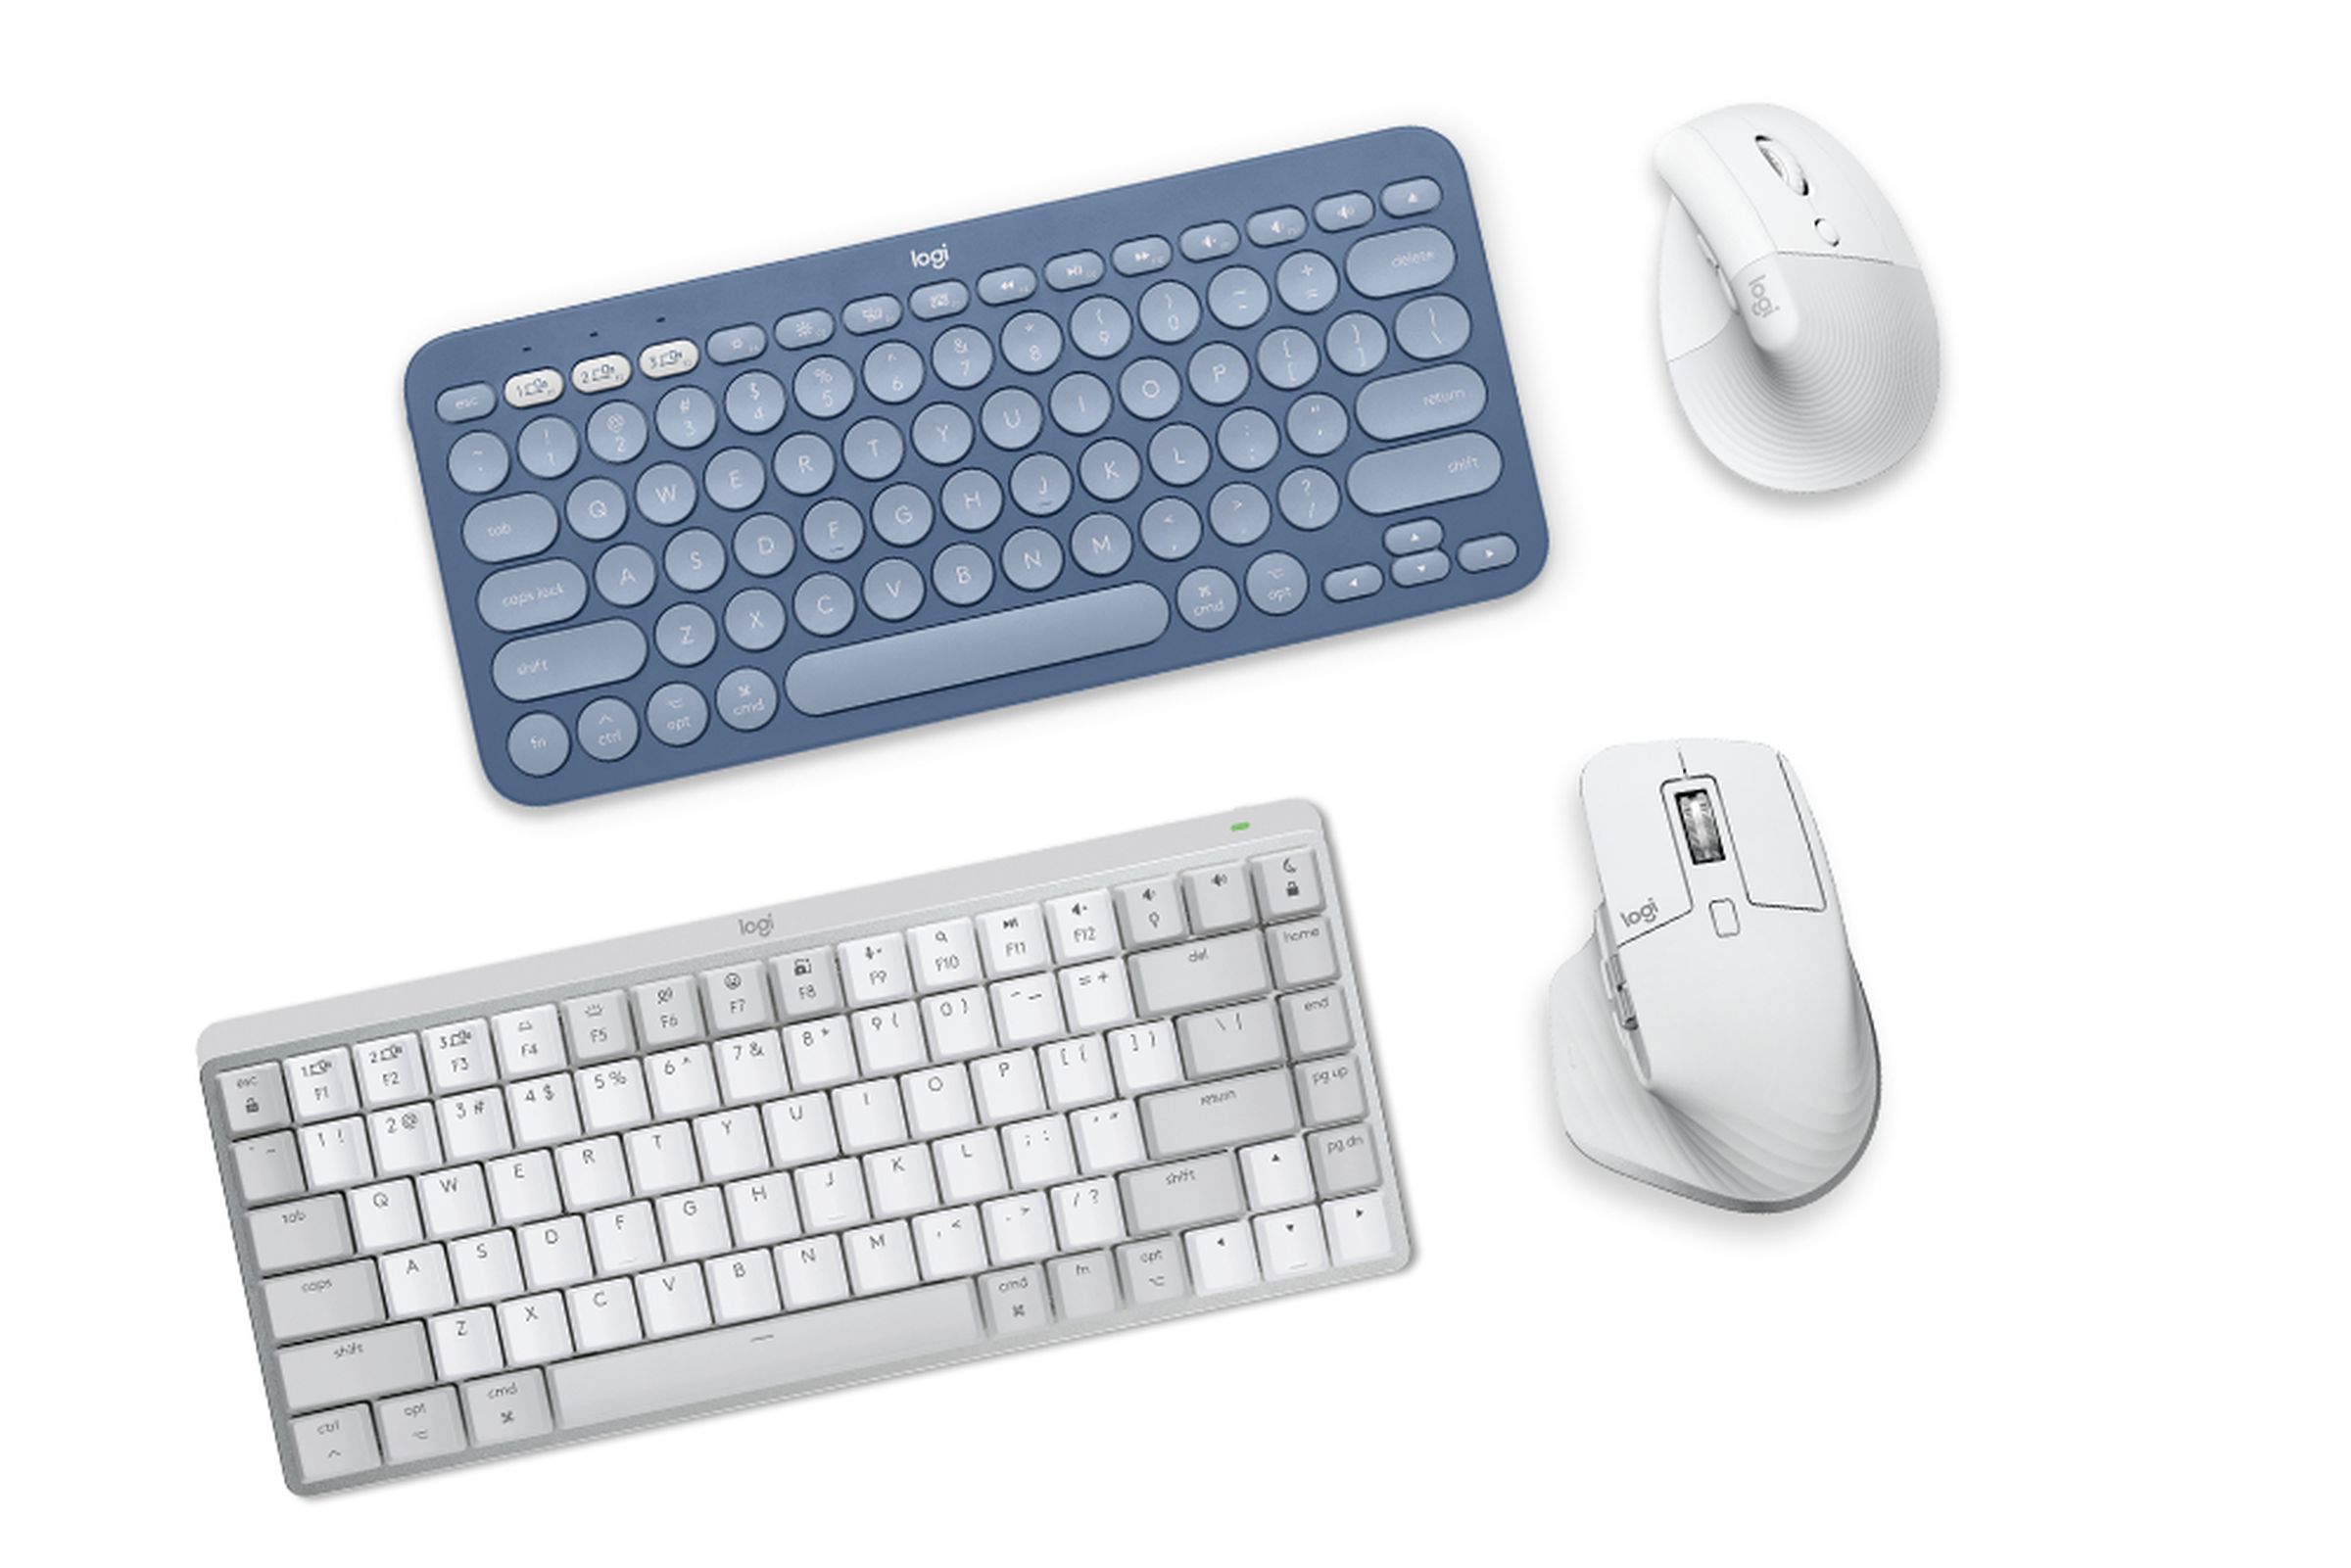 The MX Mechanical Mini for Mac, the MX Master 3S for Mac, the Lift for Mac ergonomic mouse, and the K380 Bluetooth Keyboard for Mac.